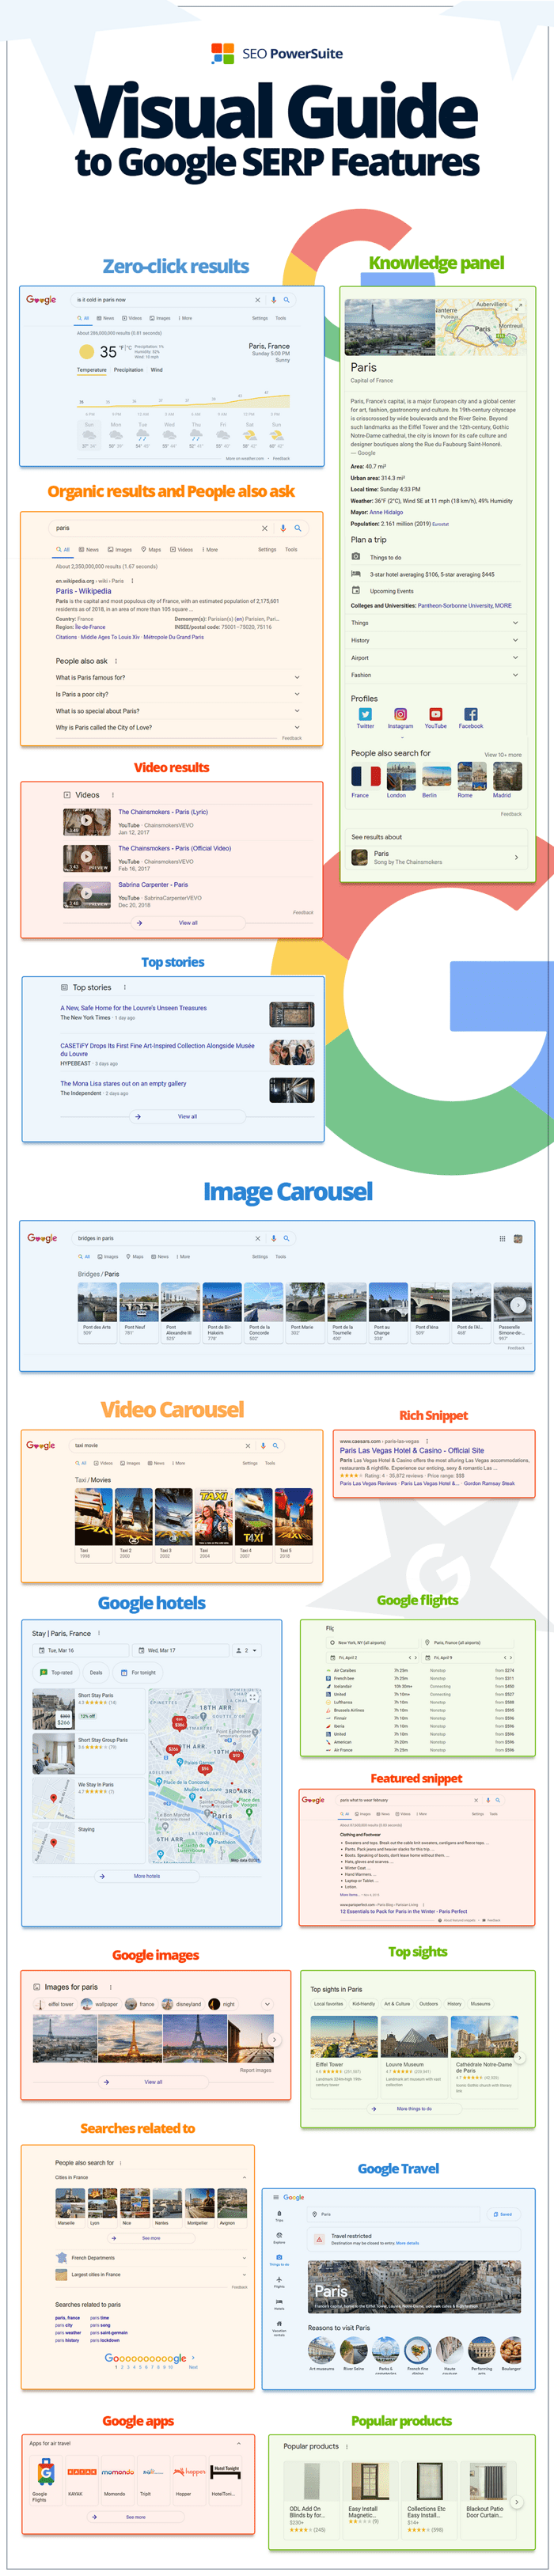 Visual guide to SERP features on Google